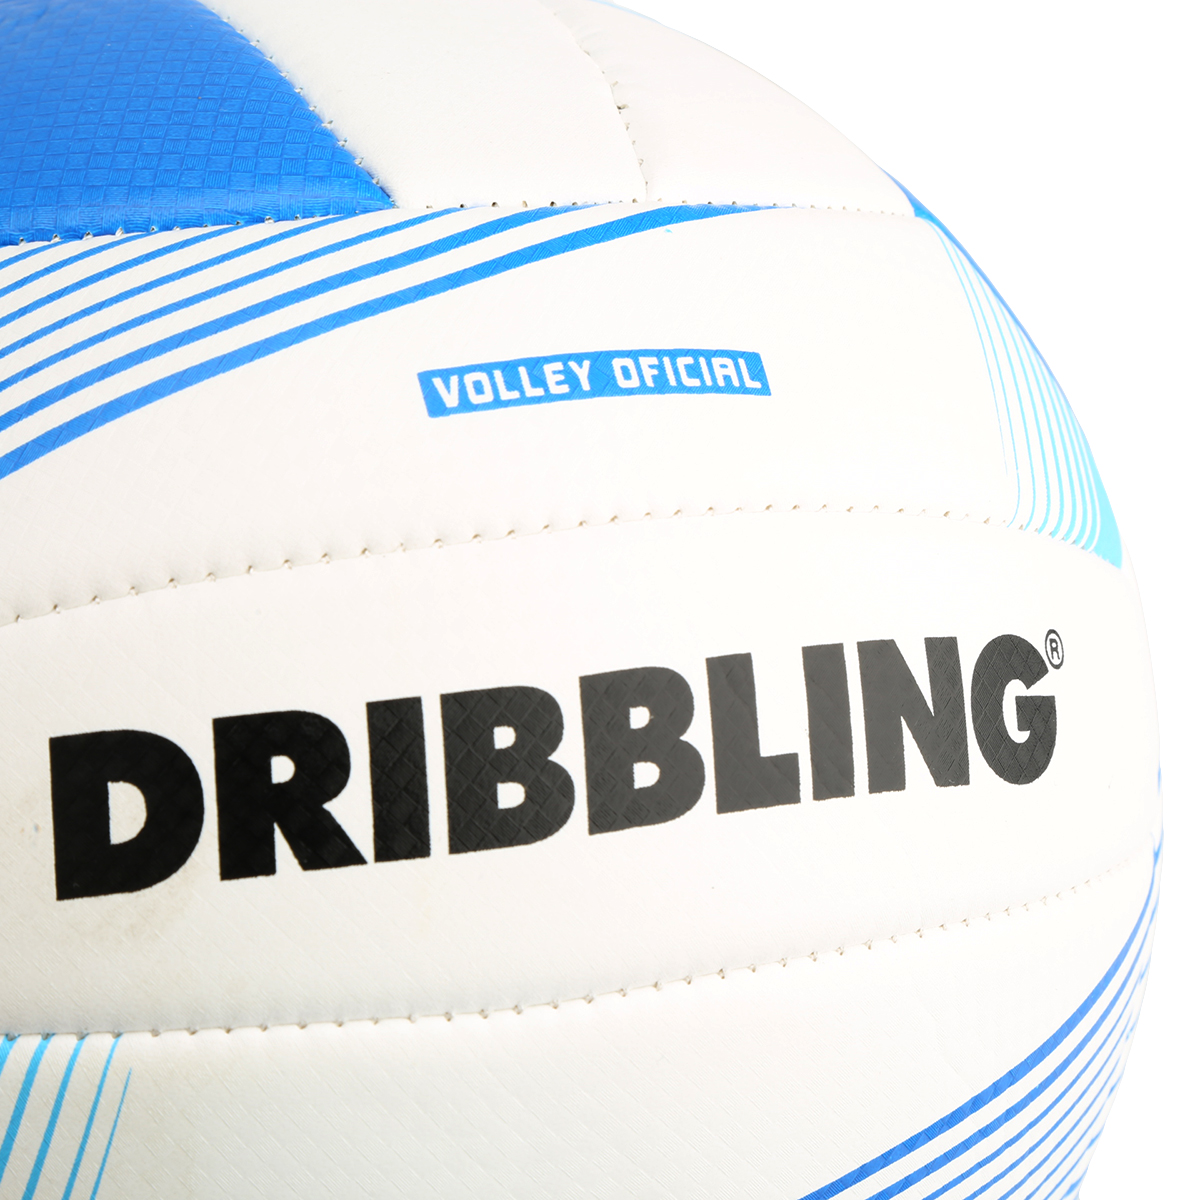 Pelota Dribbling Voley Classic 1.0,  image number null